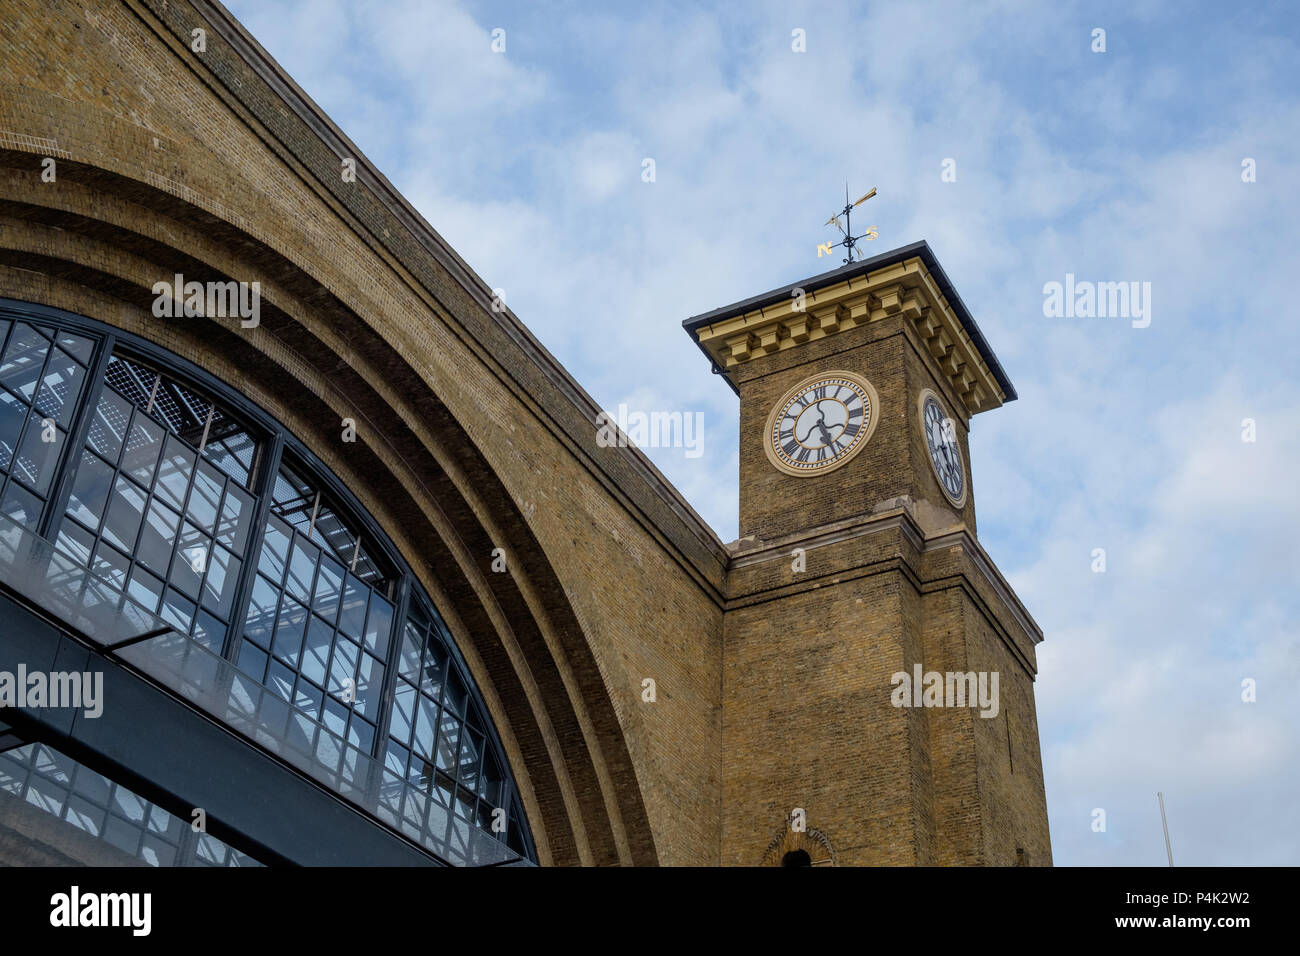 Kings Cross Station London 120 ft. high clock tower with 9 ft. diameter clock dials. Horizontal. Copy space. Stock Photo